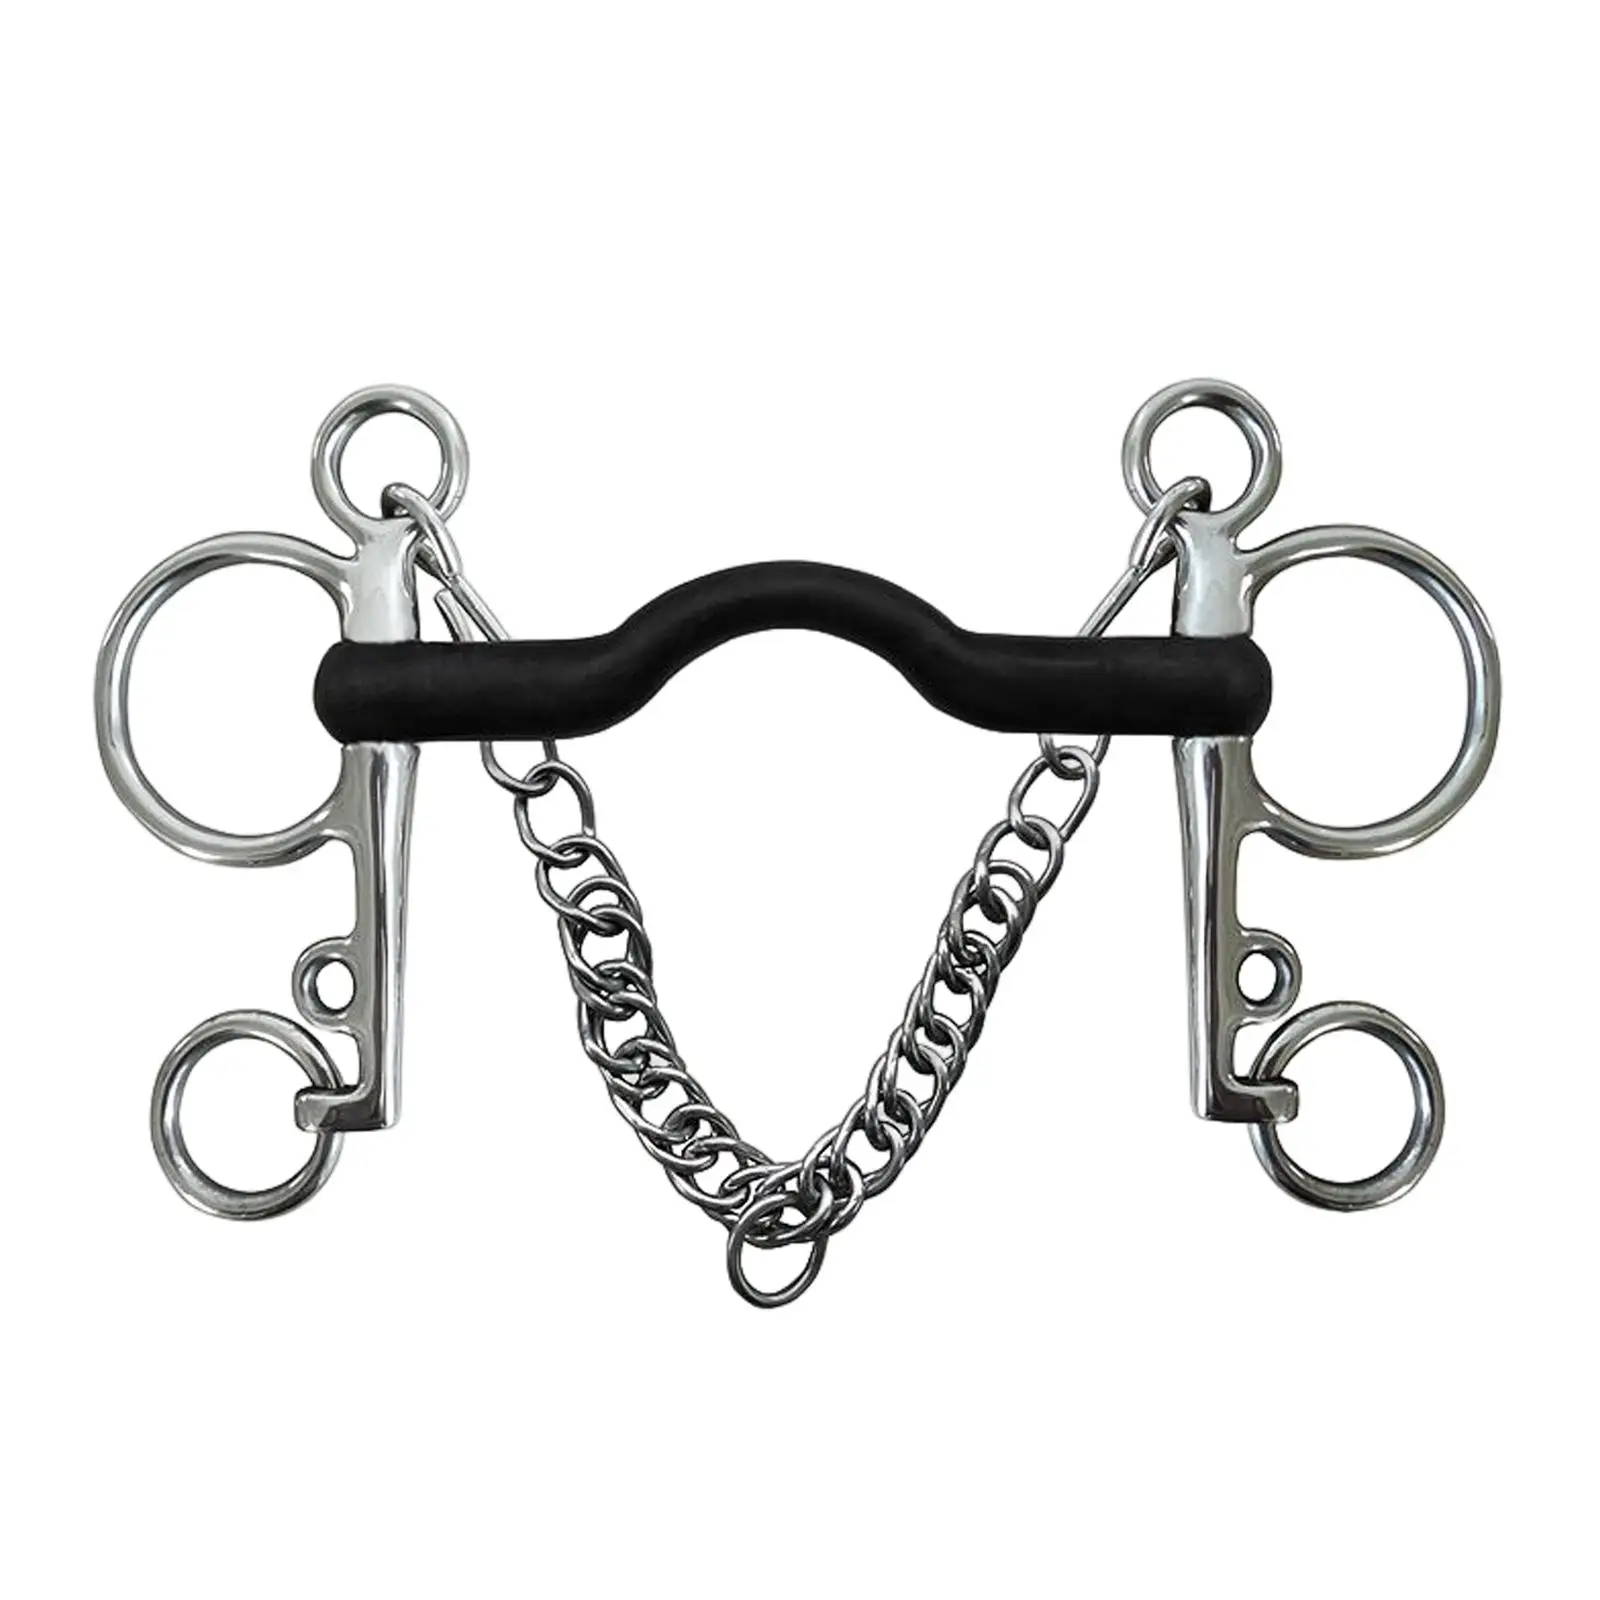 Western Style Horse Bit, W/Curb Hooks Chain, Mouth Horse